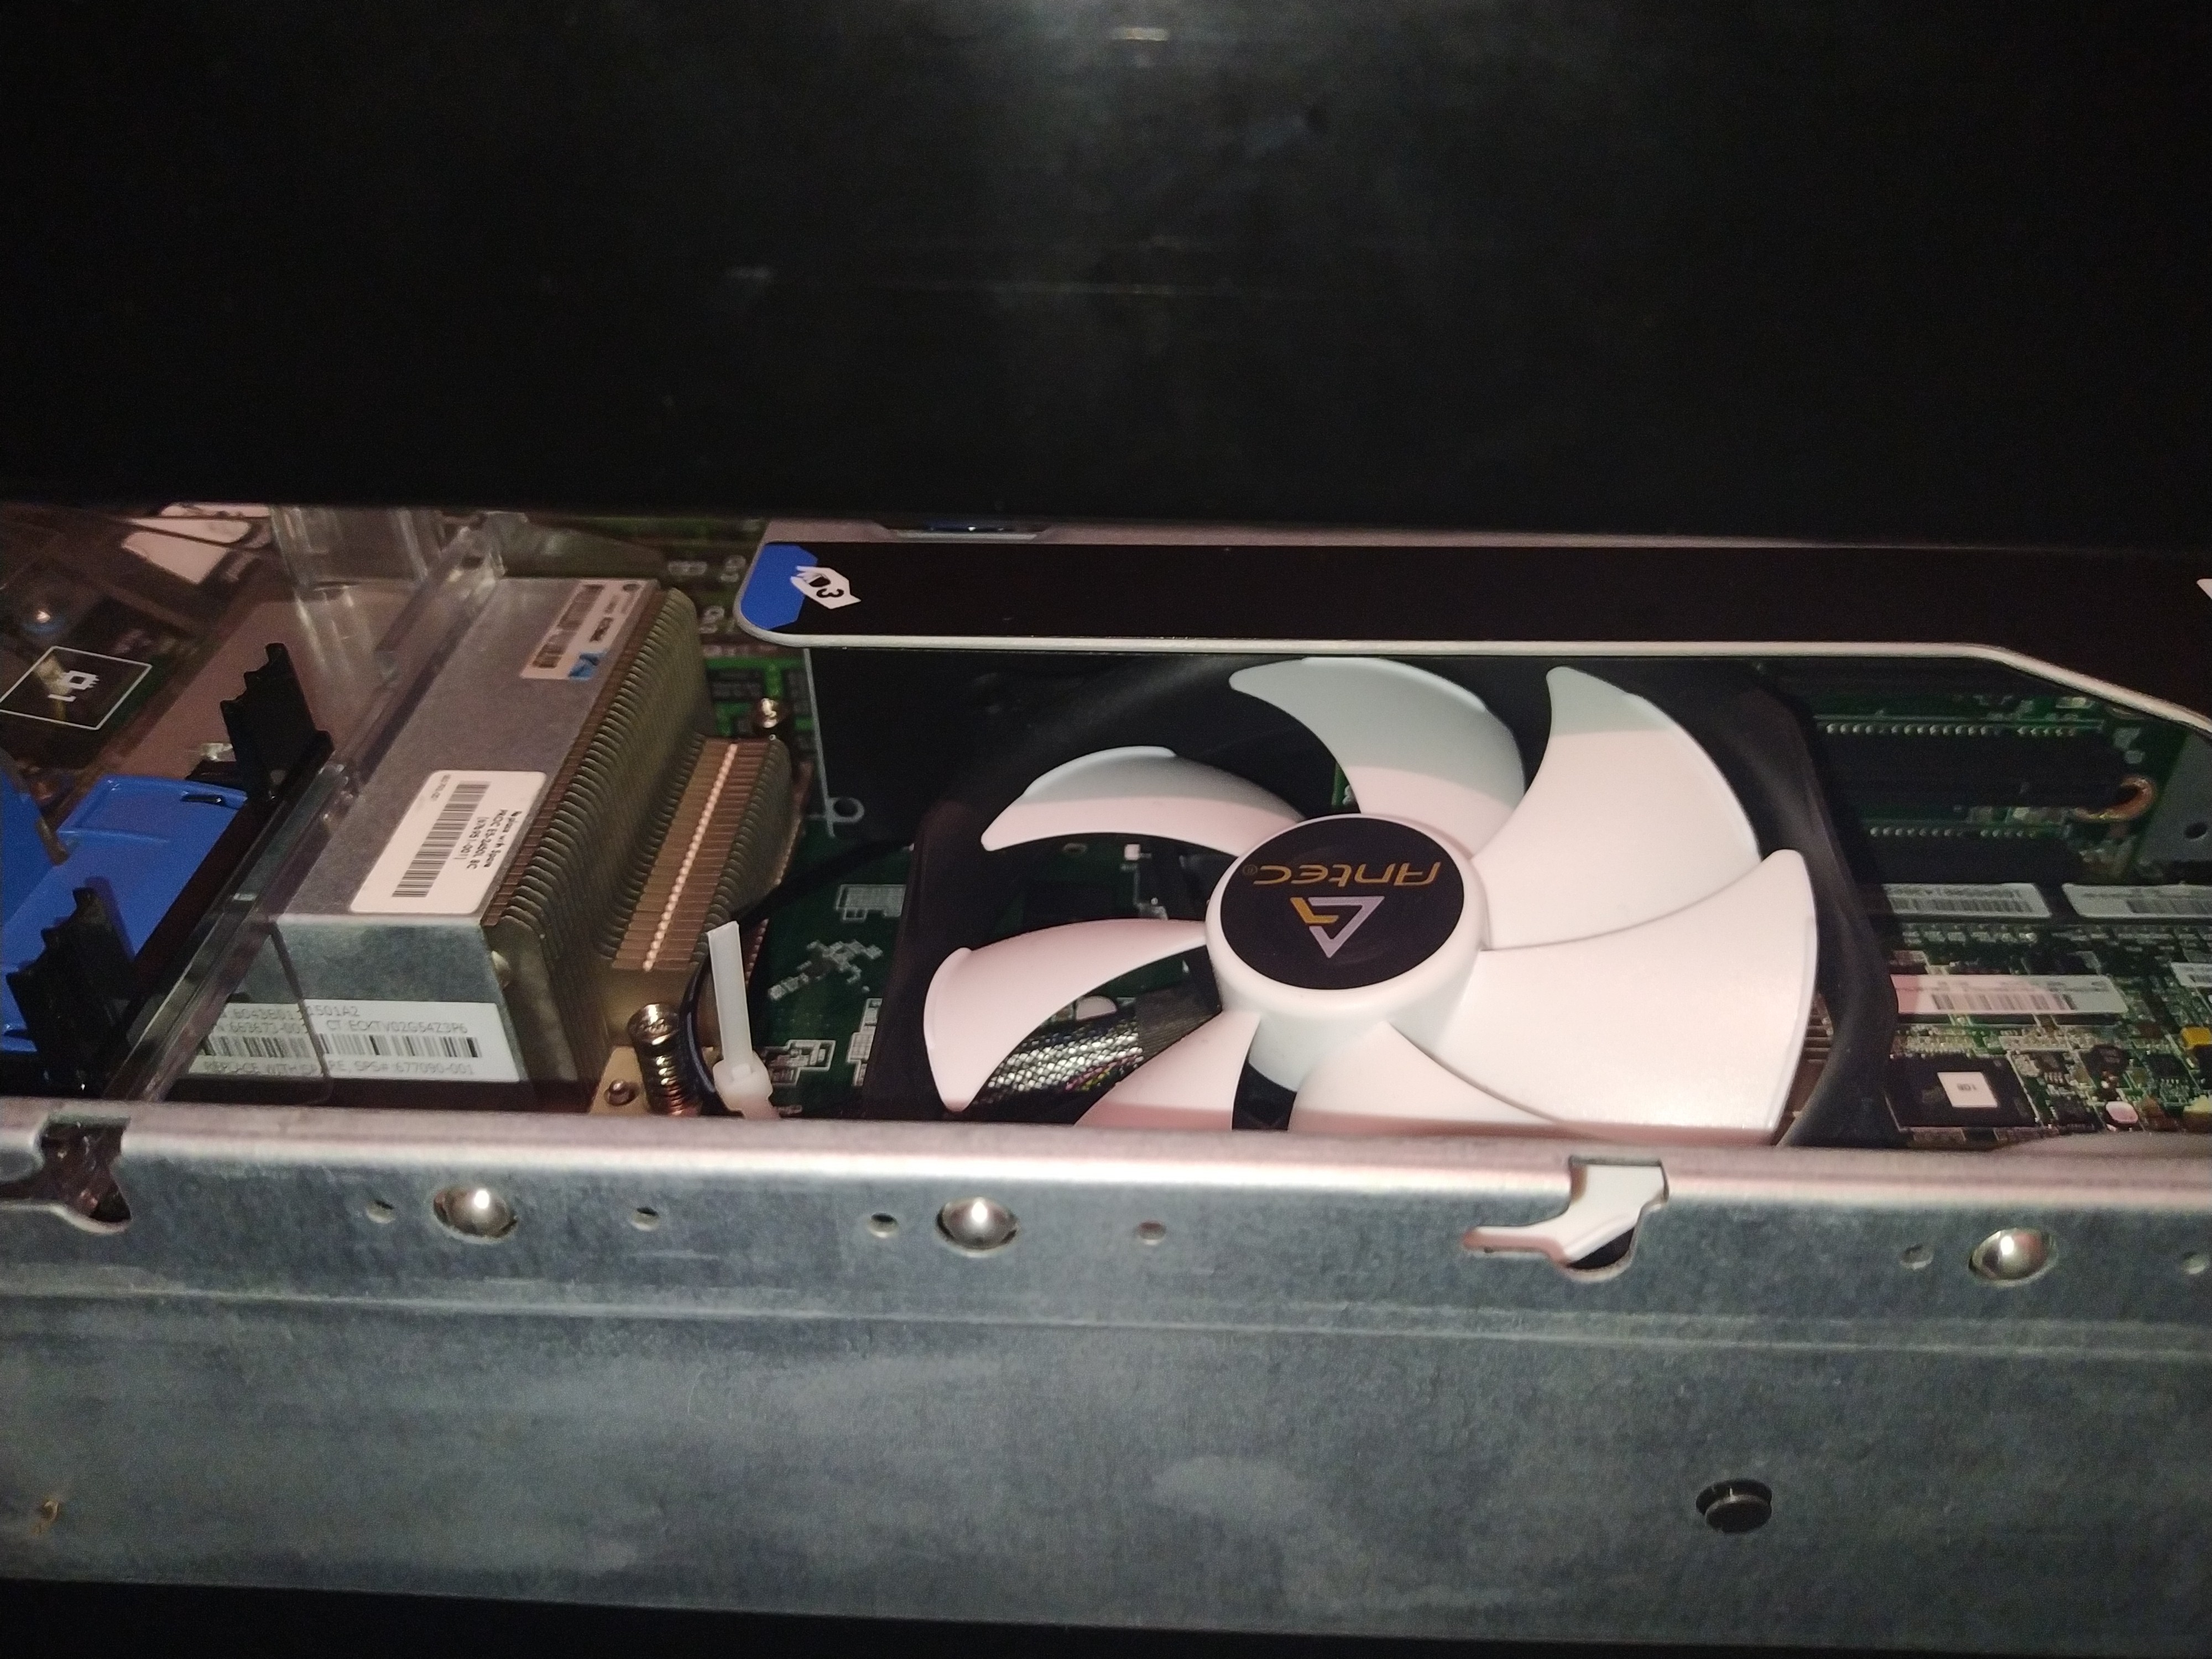 An image of a 120mm computer fan slotted into a rack mount HPE G8 server on top of a RAID card to improve temperatures and airflow.